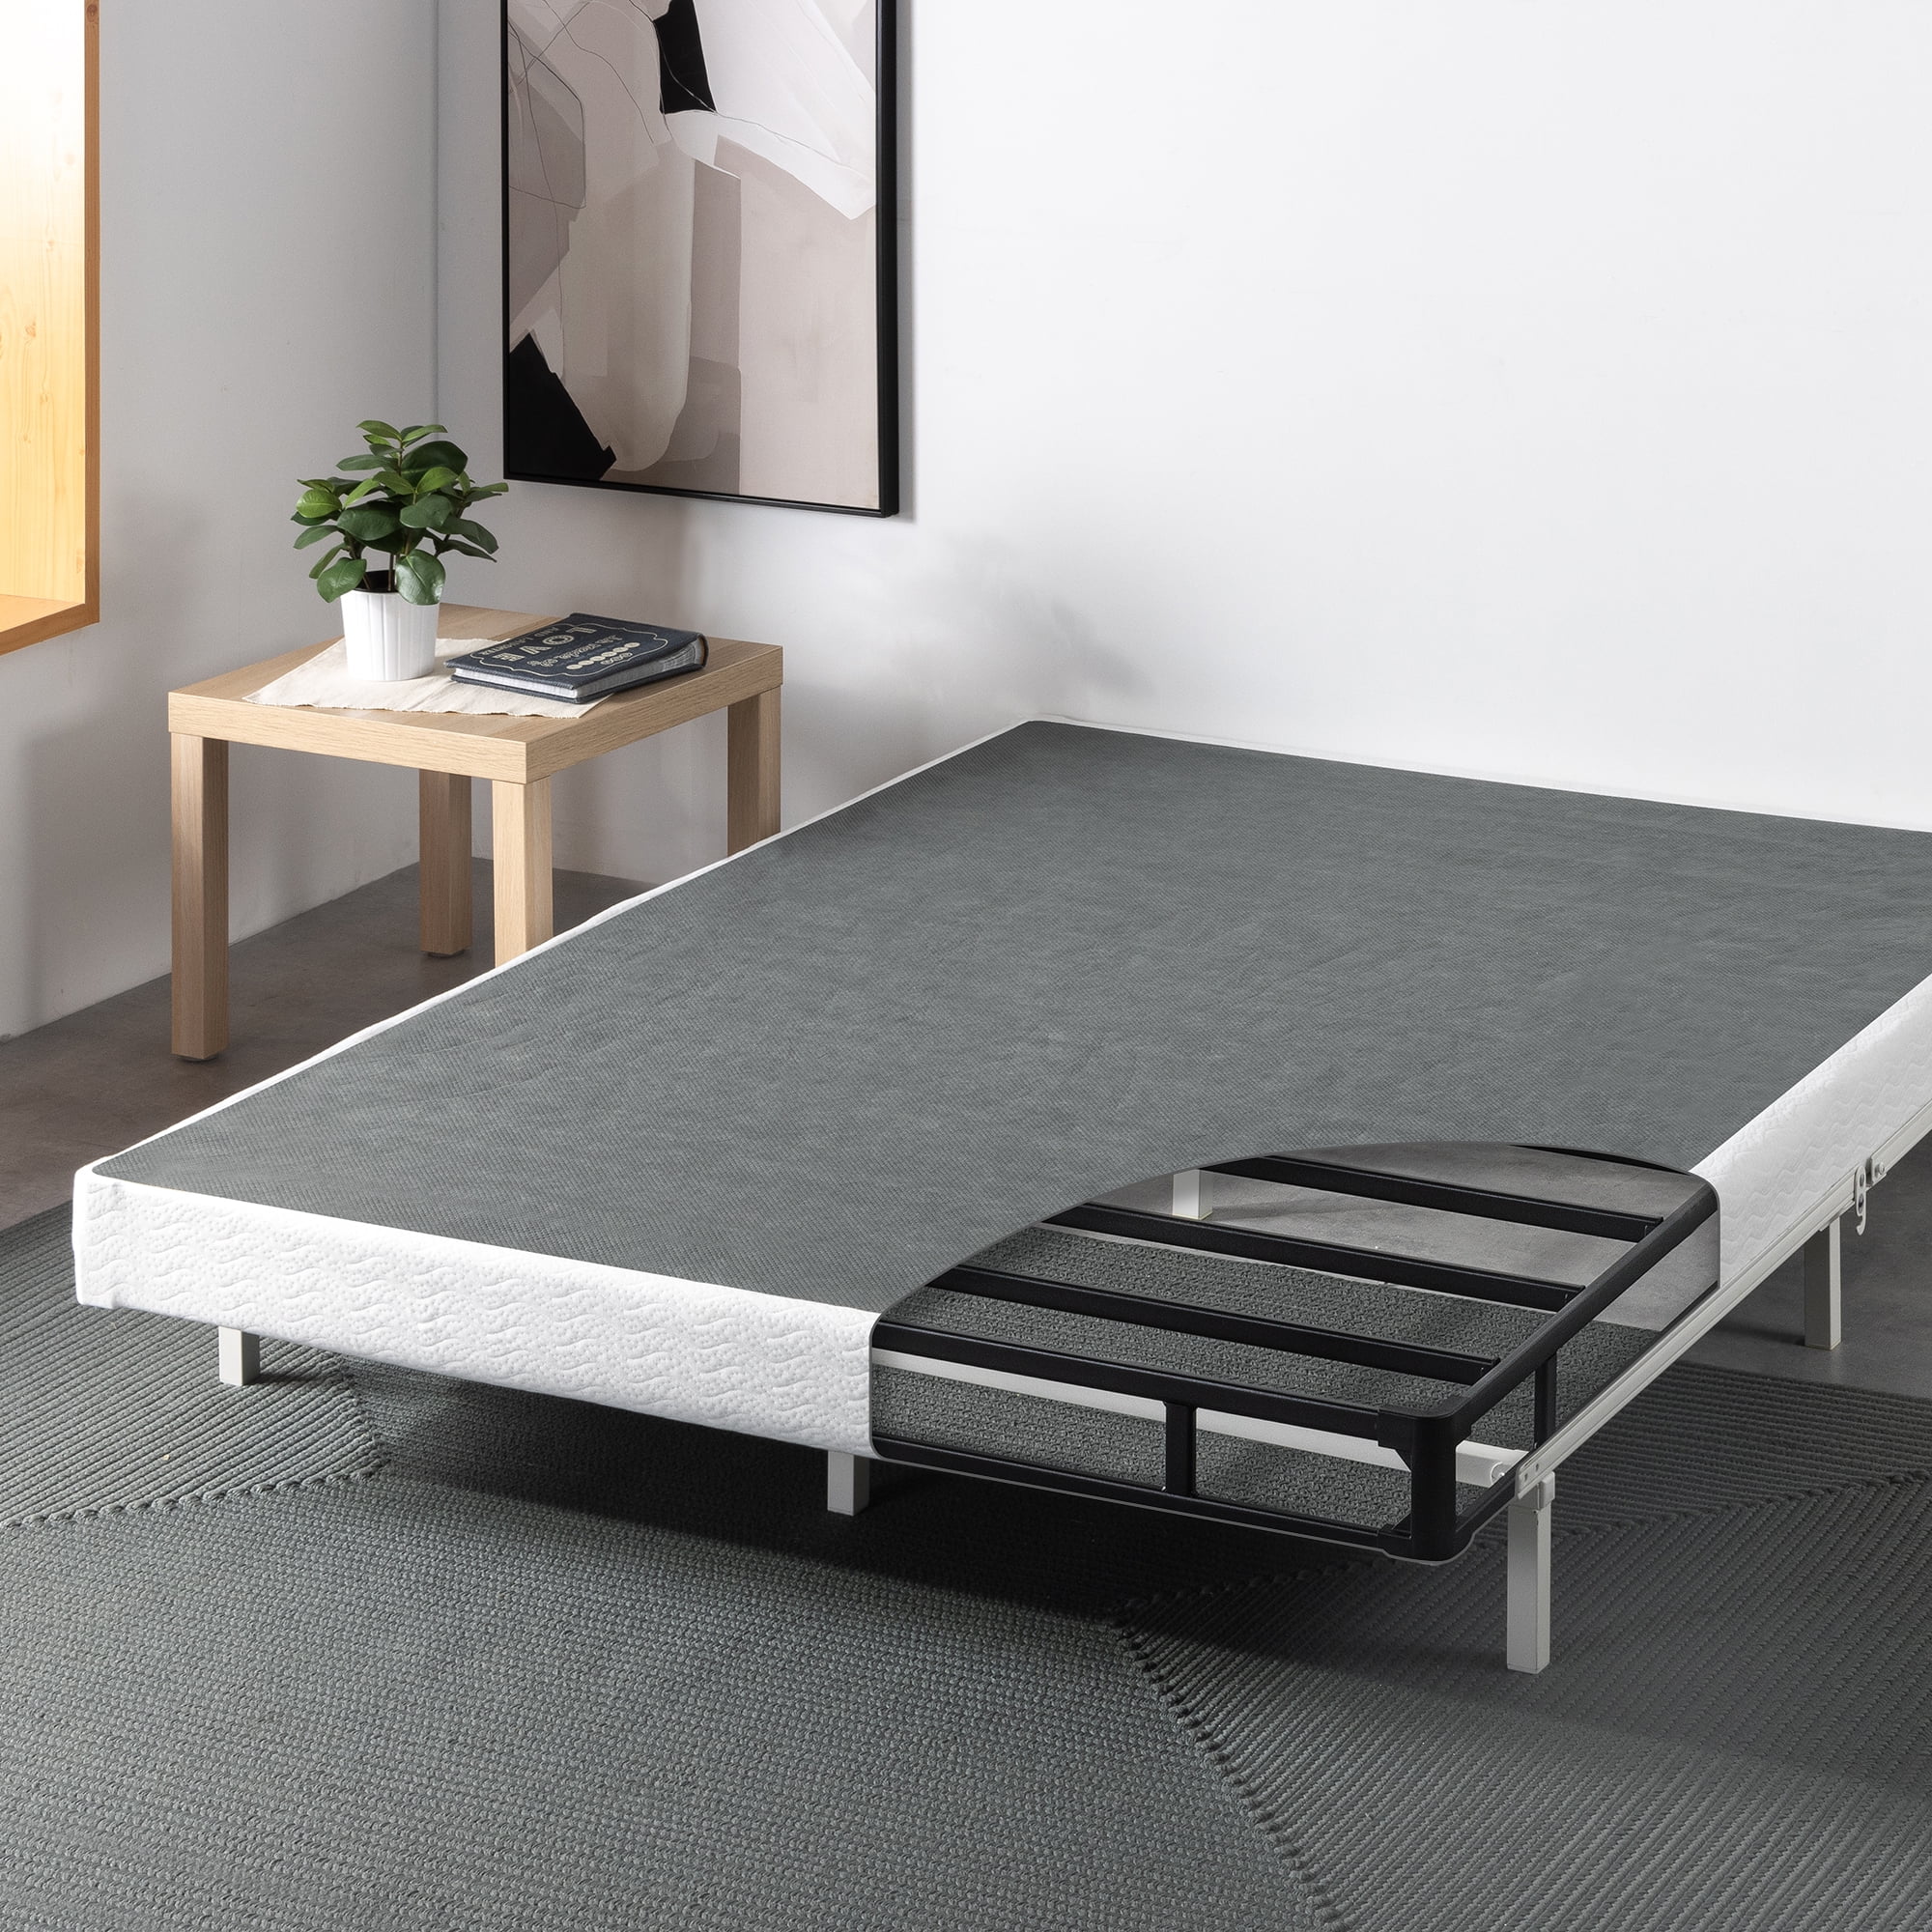 Half-Fold Metal Box Spring Queen Twin Full King Size Mattress Bed Foundation New 